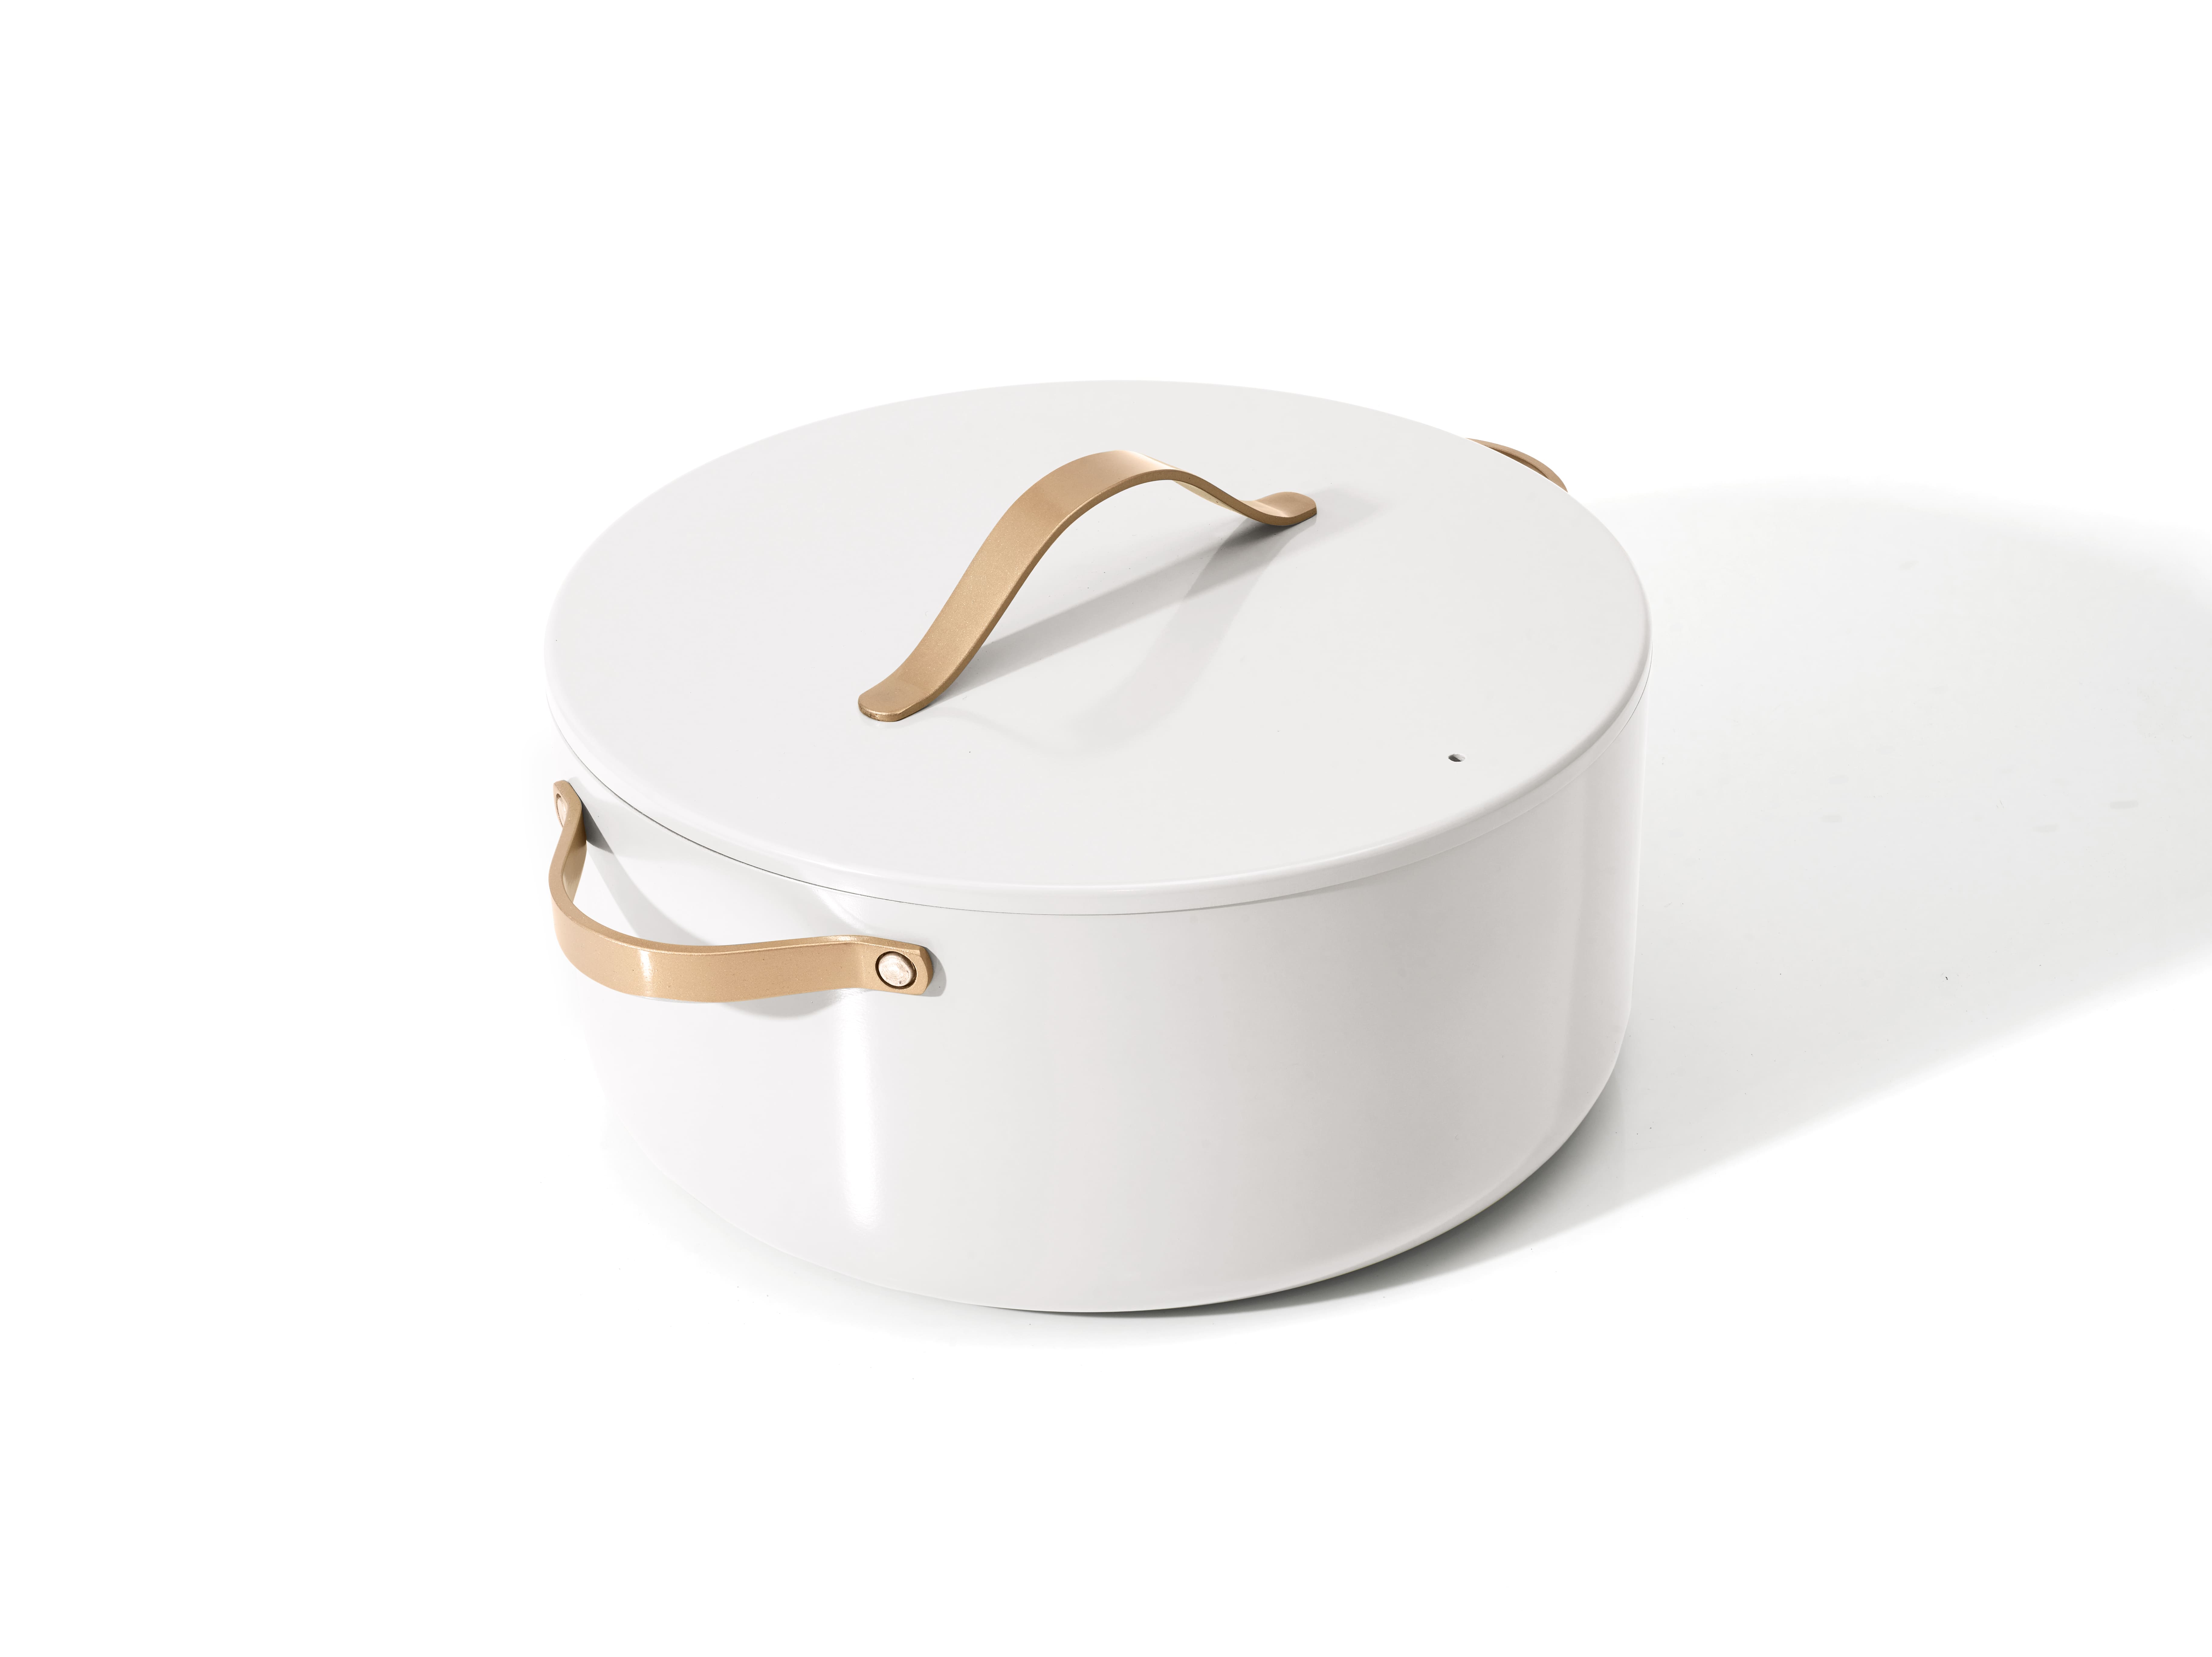 Beautiful 5 Quart Dutch Oven, White Icing by Drew Barrymore - image 1 of 8